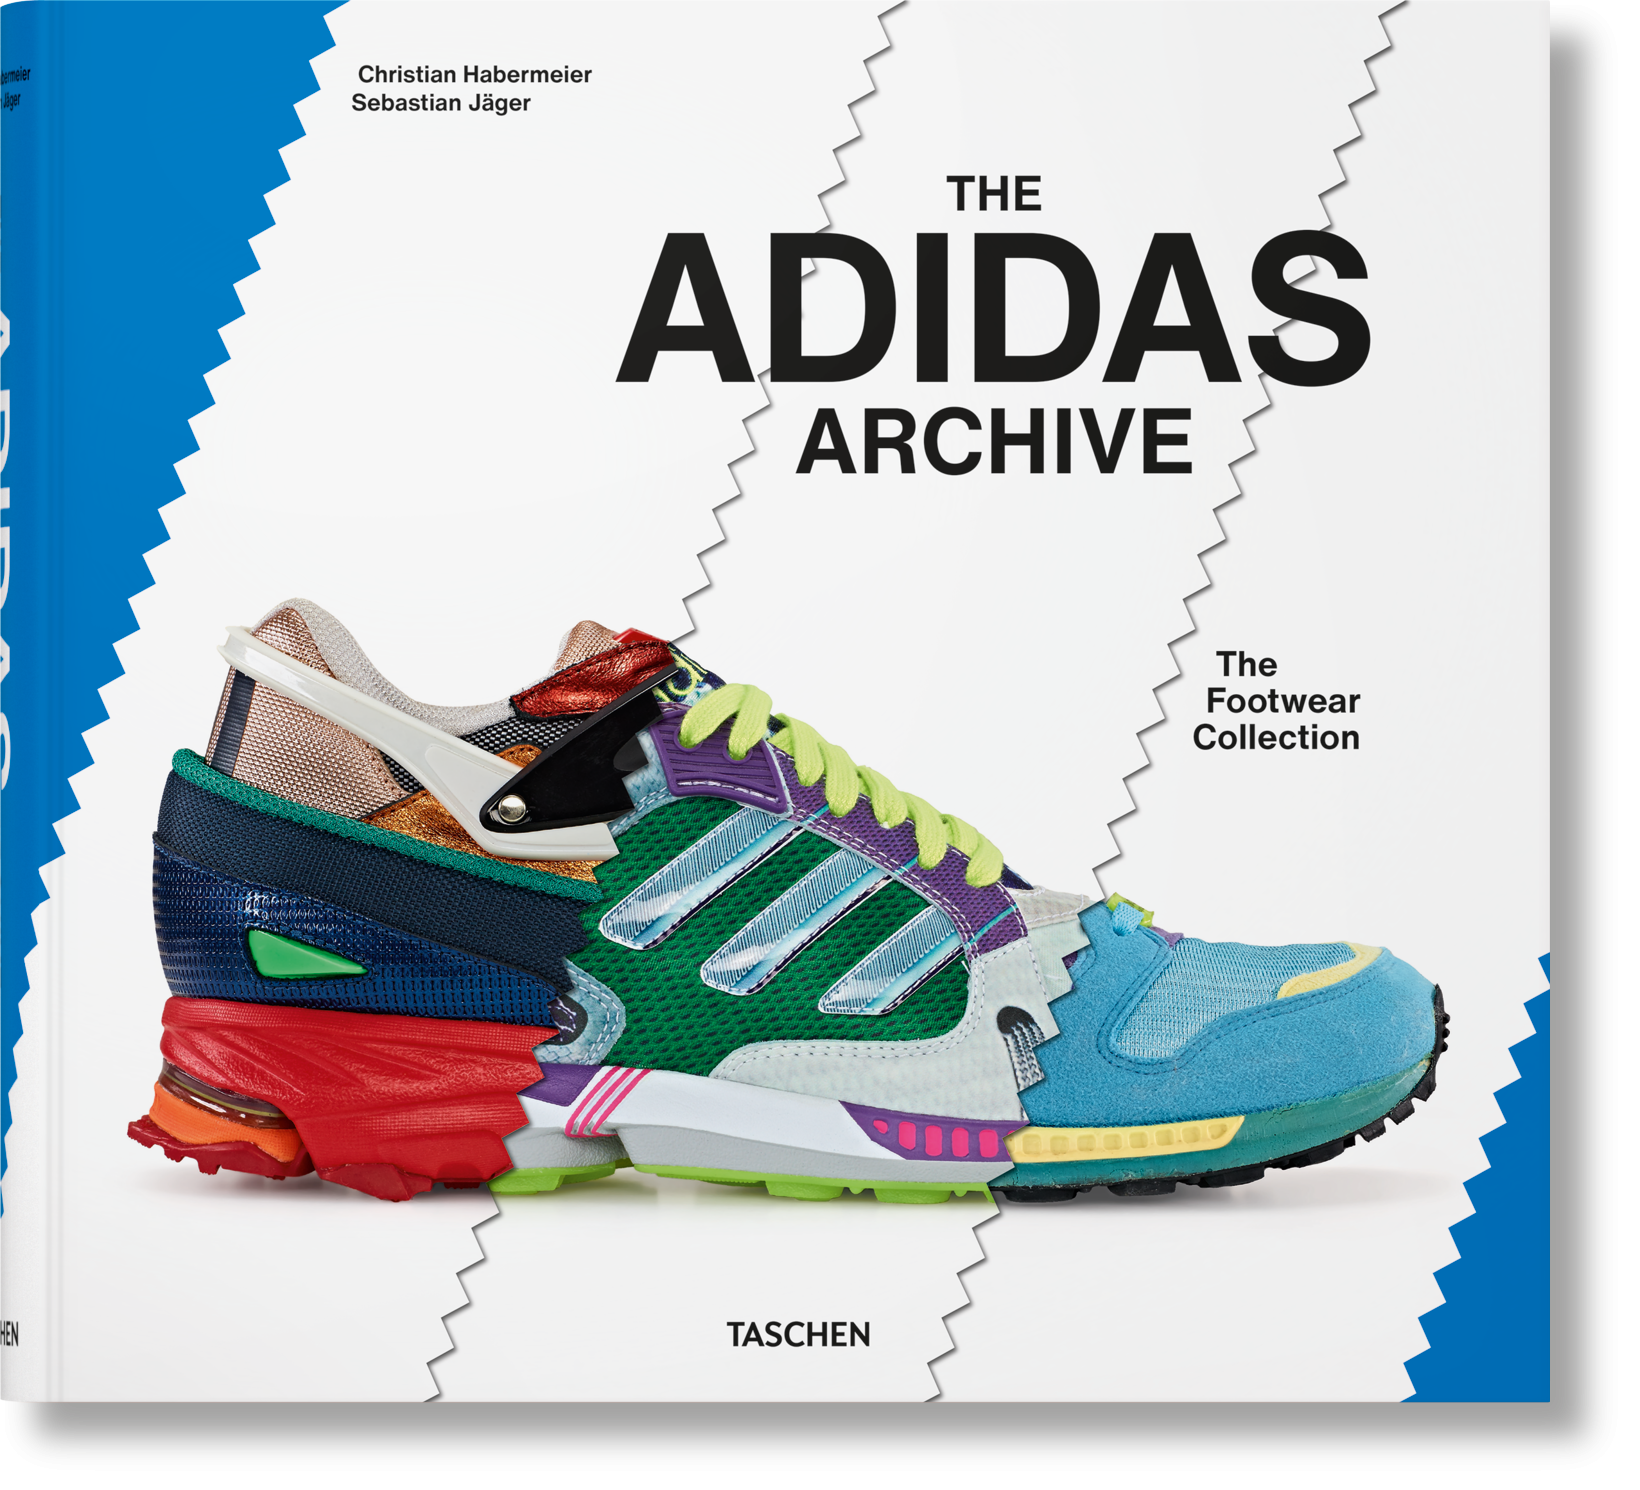 Books: The Archive. The Footwear Collection